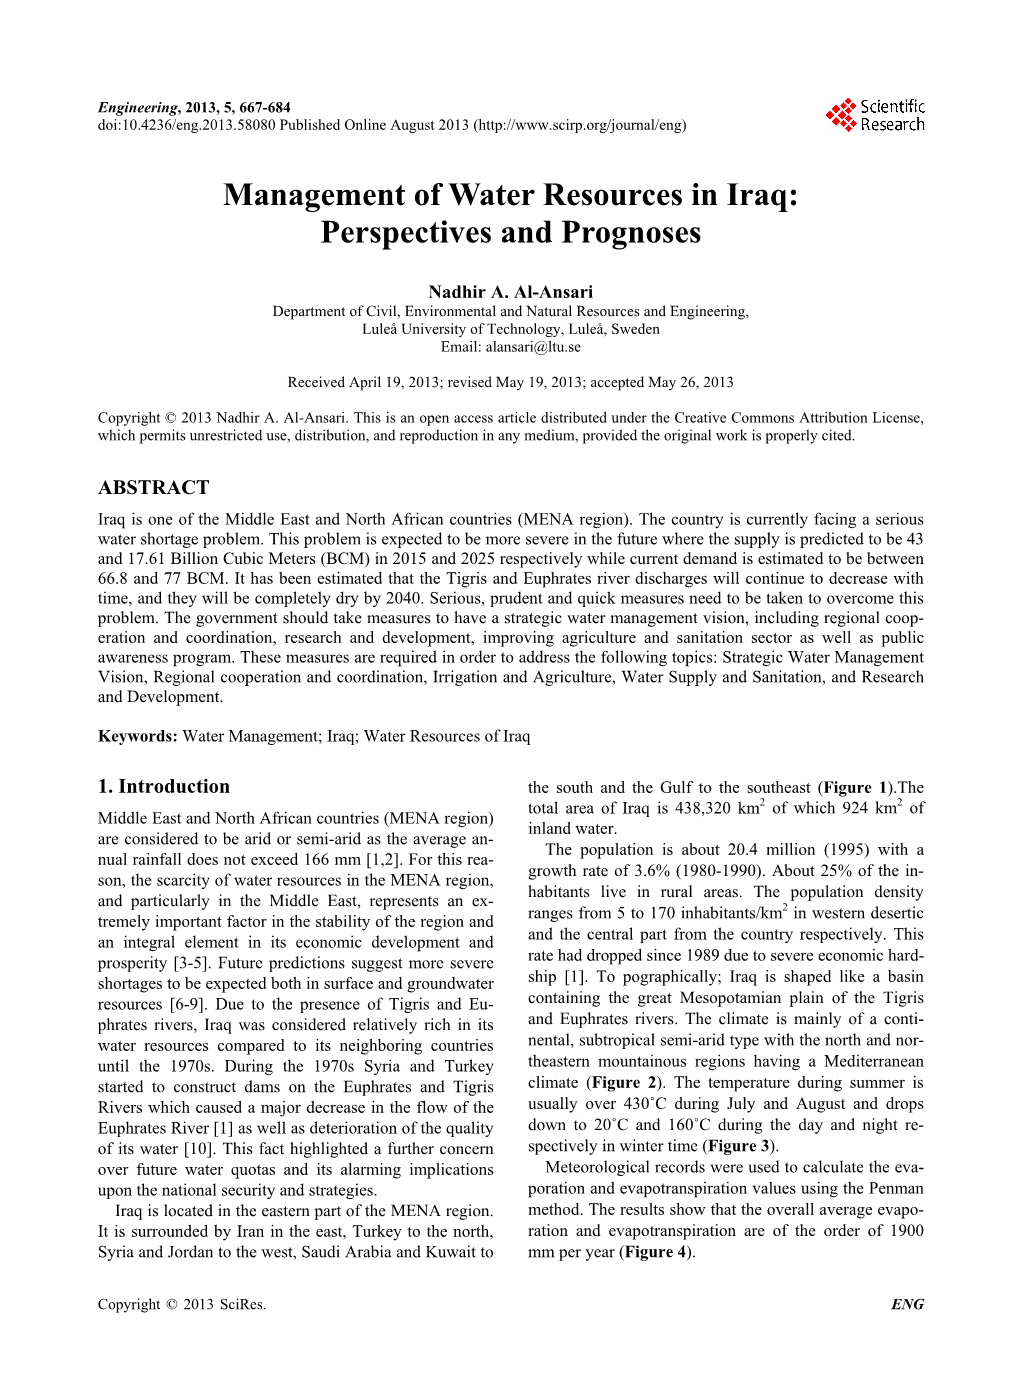 Management of Water Resources in Iraq: Perspectives and Prognoses